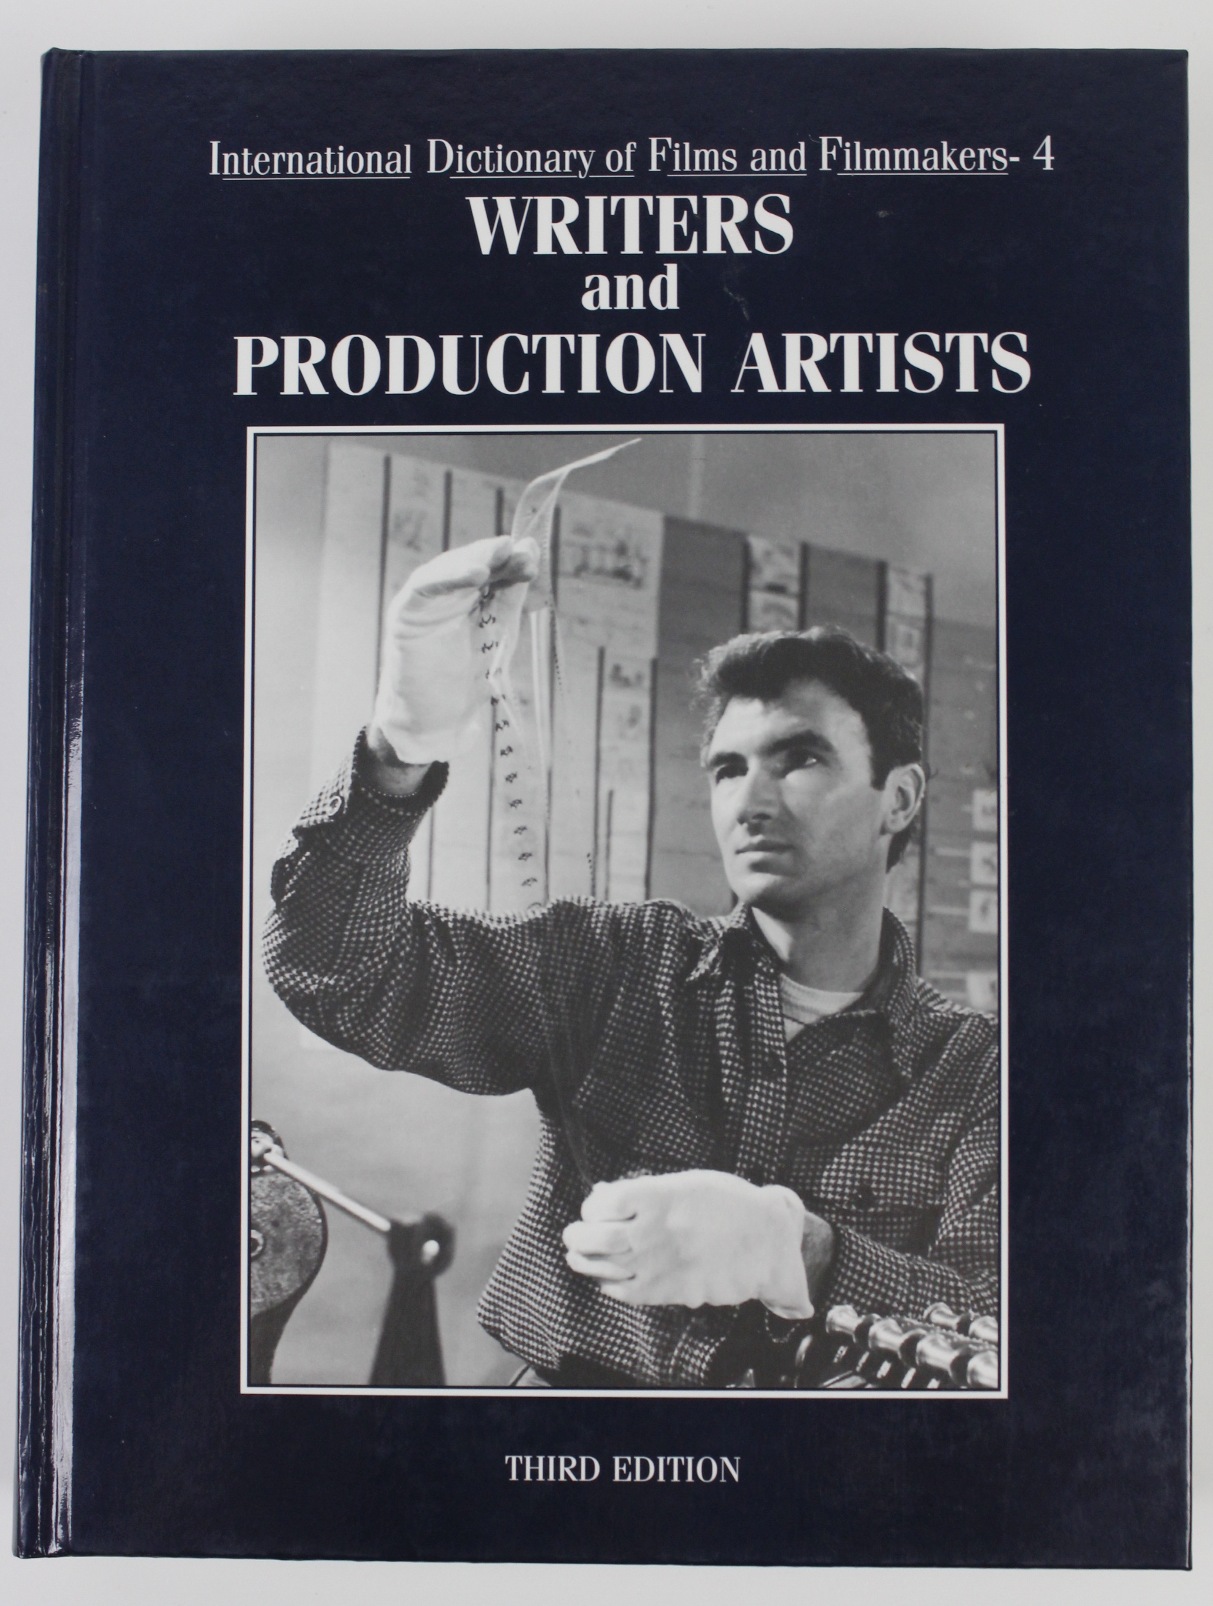 International Dictionary of Films and Filmmakers 4: Writers and Production Artists  3rd edition - Elert, Nicolet V., Judith M. Kass and Grace Jeromski